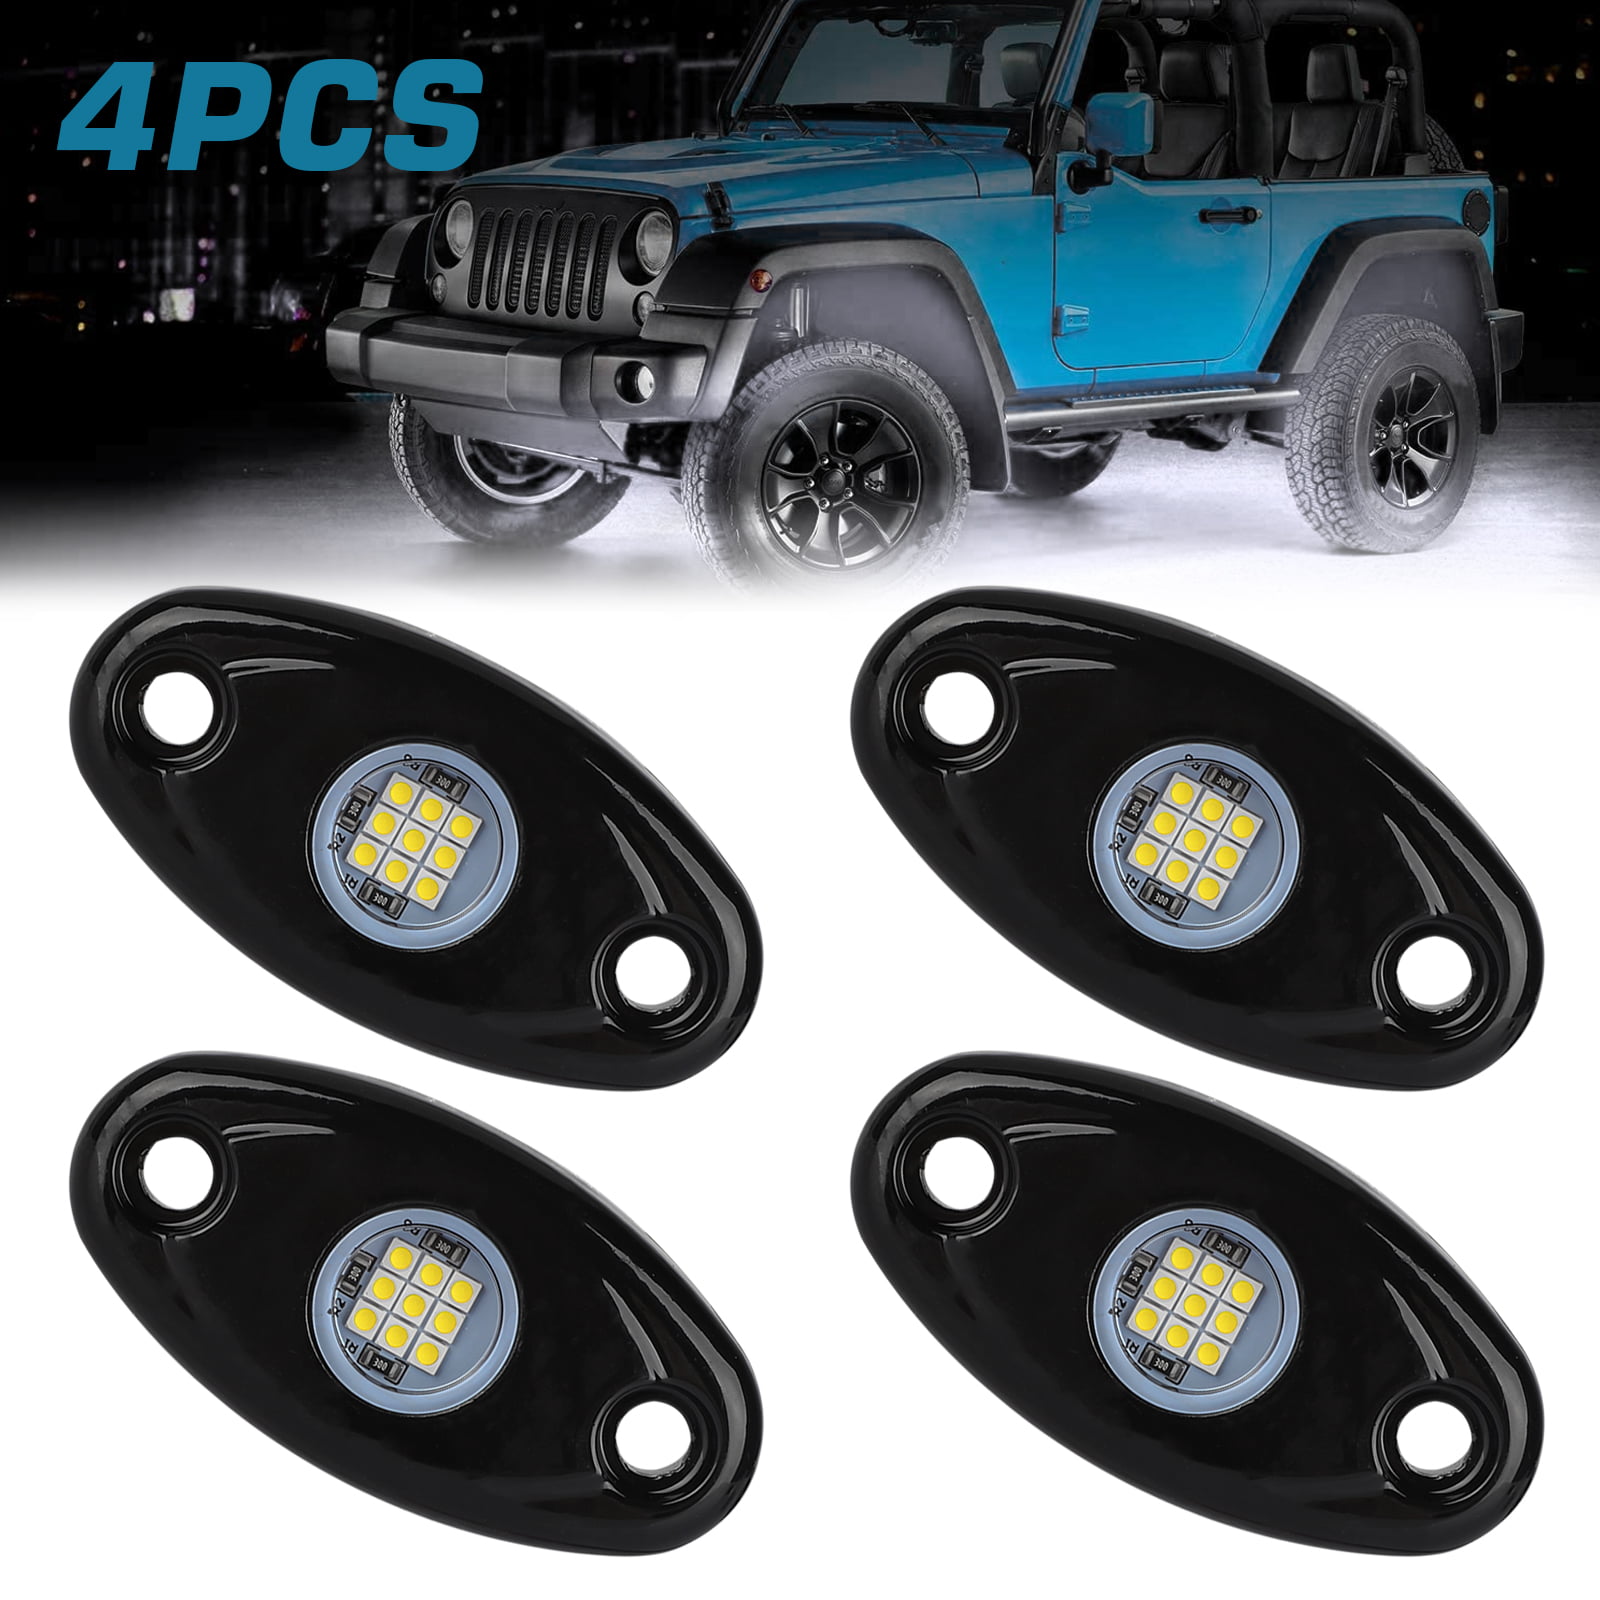 2 Pods LED Rock Lights Yellow Ampper Waterproof LED Neon Underglow Light for Car Truck ATV UTV SUV Jeep Offroad Boat Underbody Glow Trail Rig Lamp 